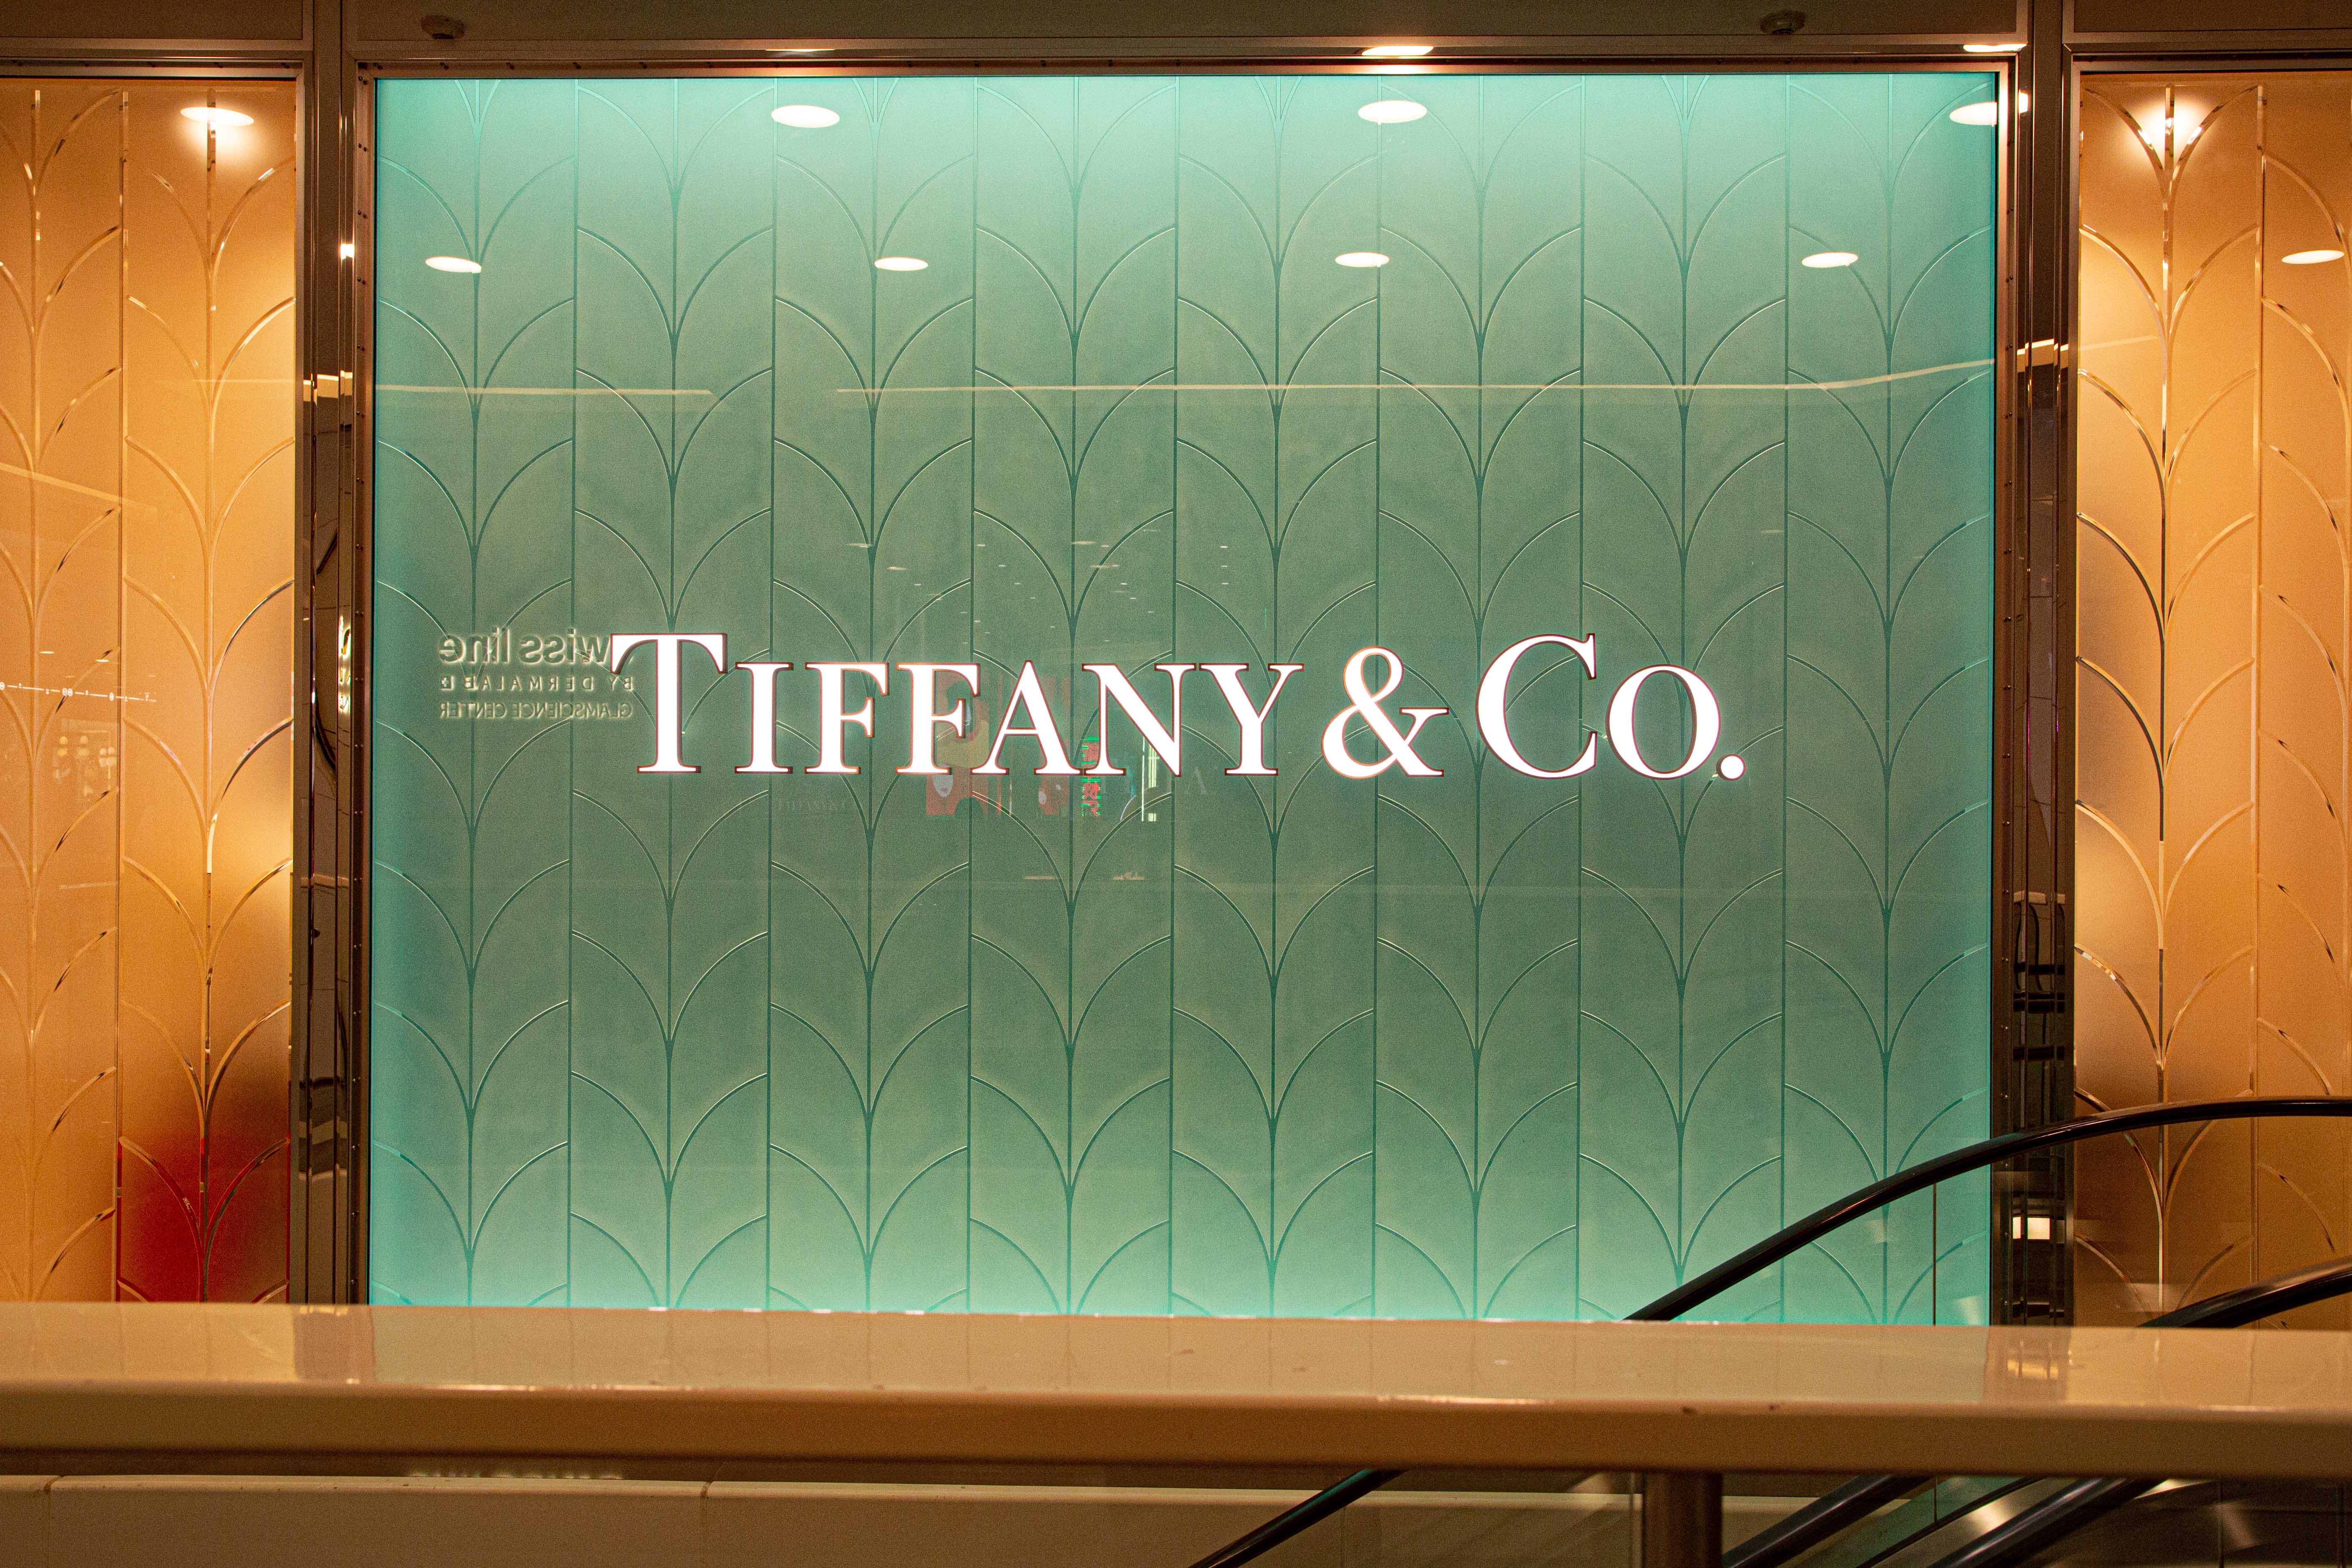 Tiffany is latest jewel for French luxury group LVMH's crown